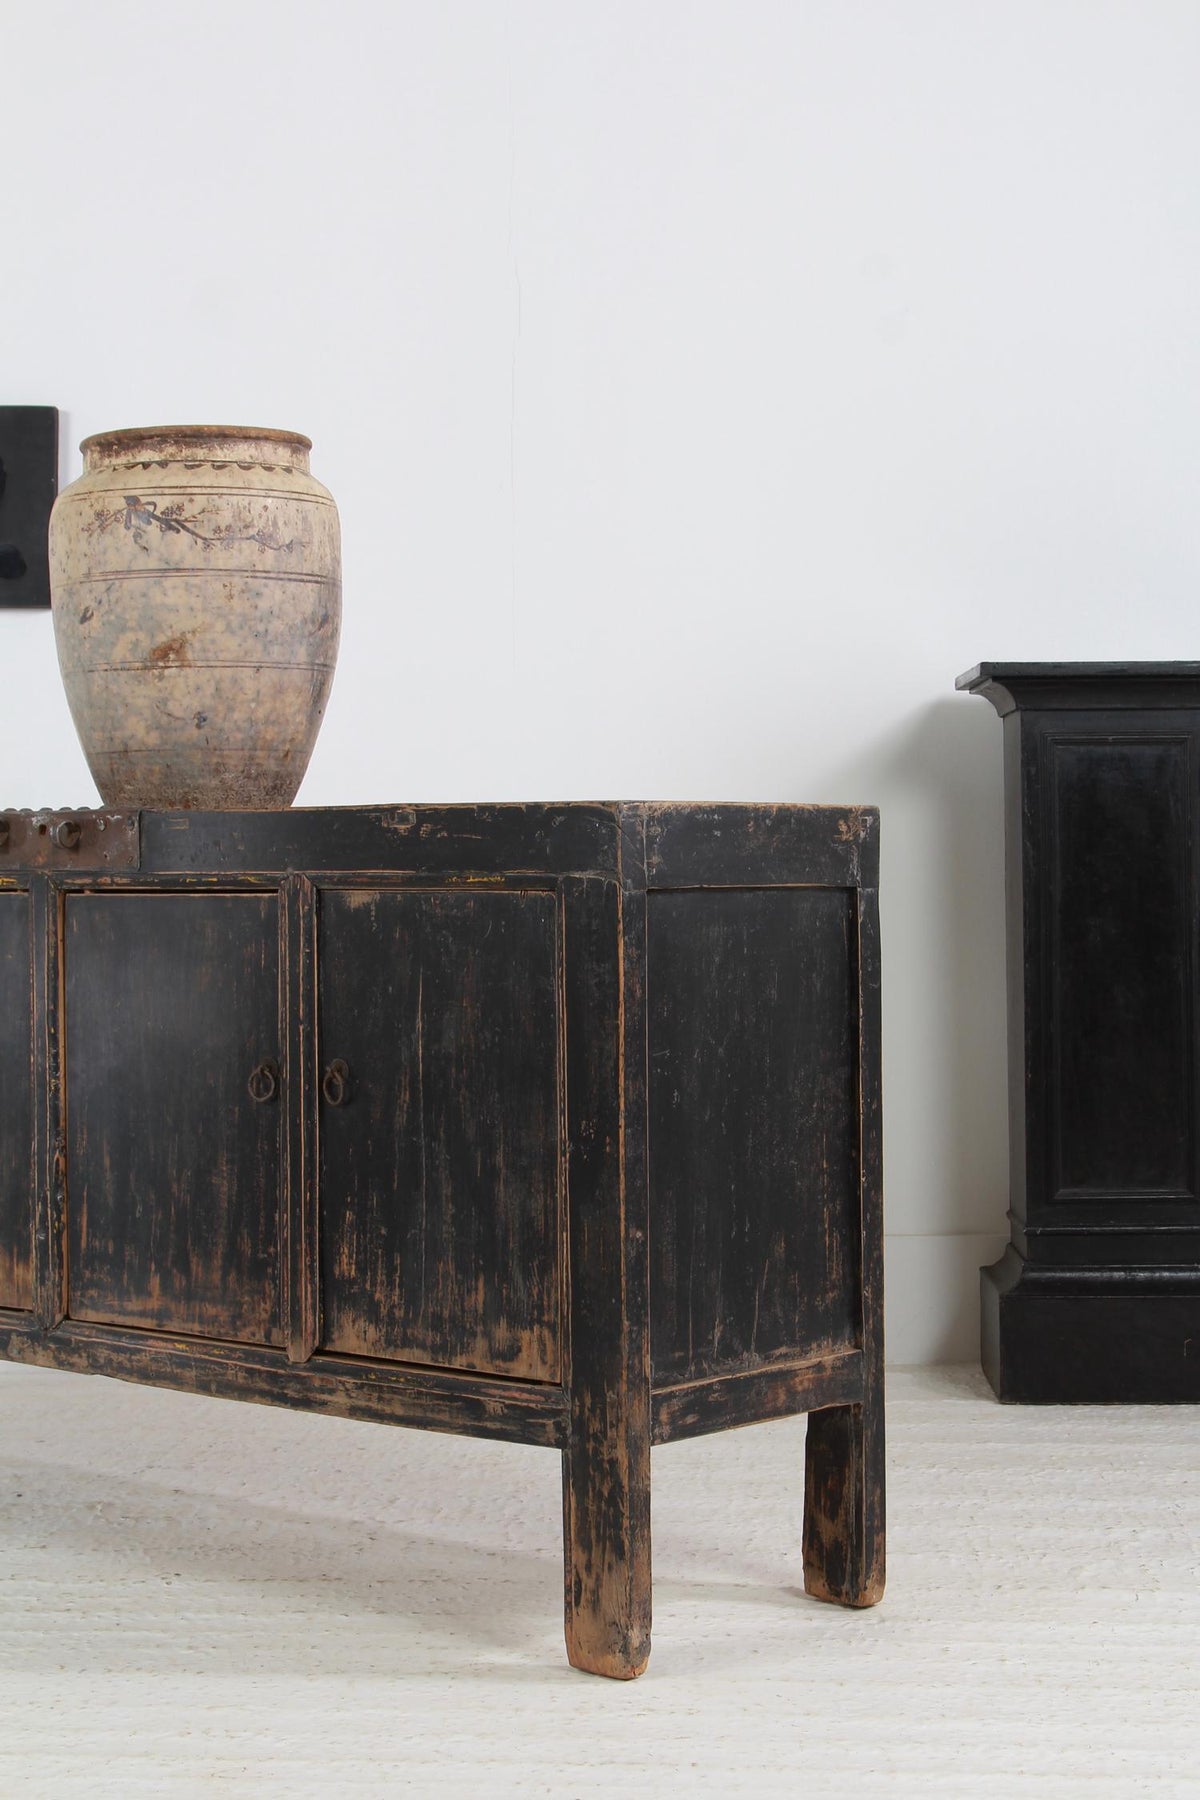 Sublime Rustic ELM  Four door  SIDEBOARD WITH  BLACK PATINA